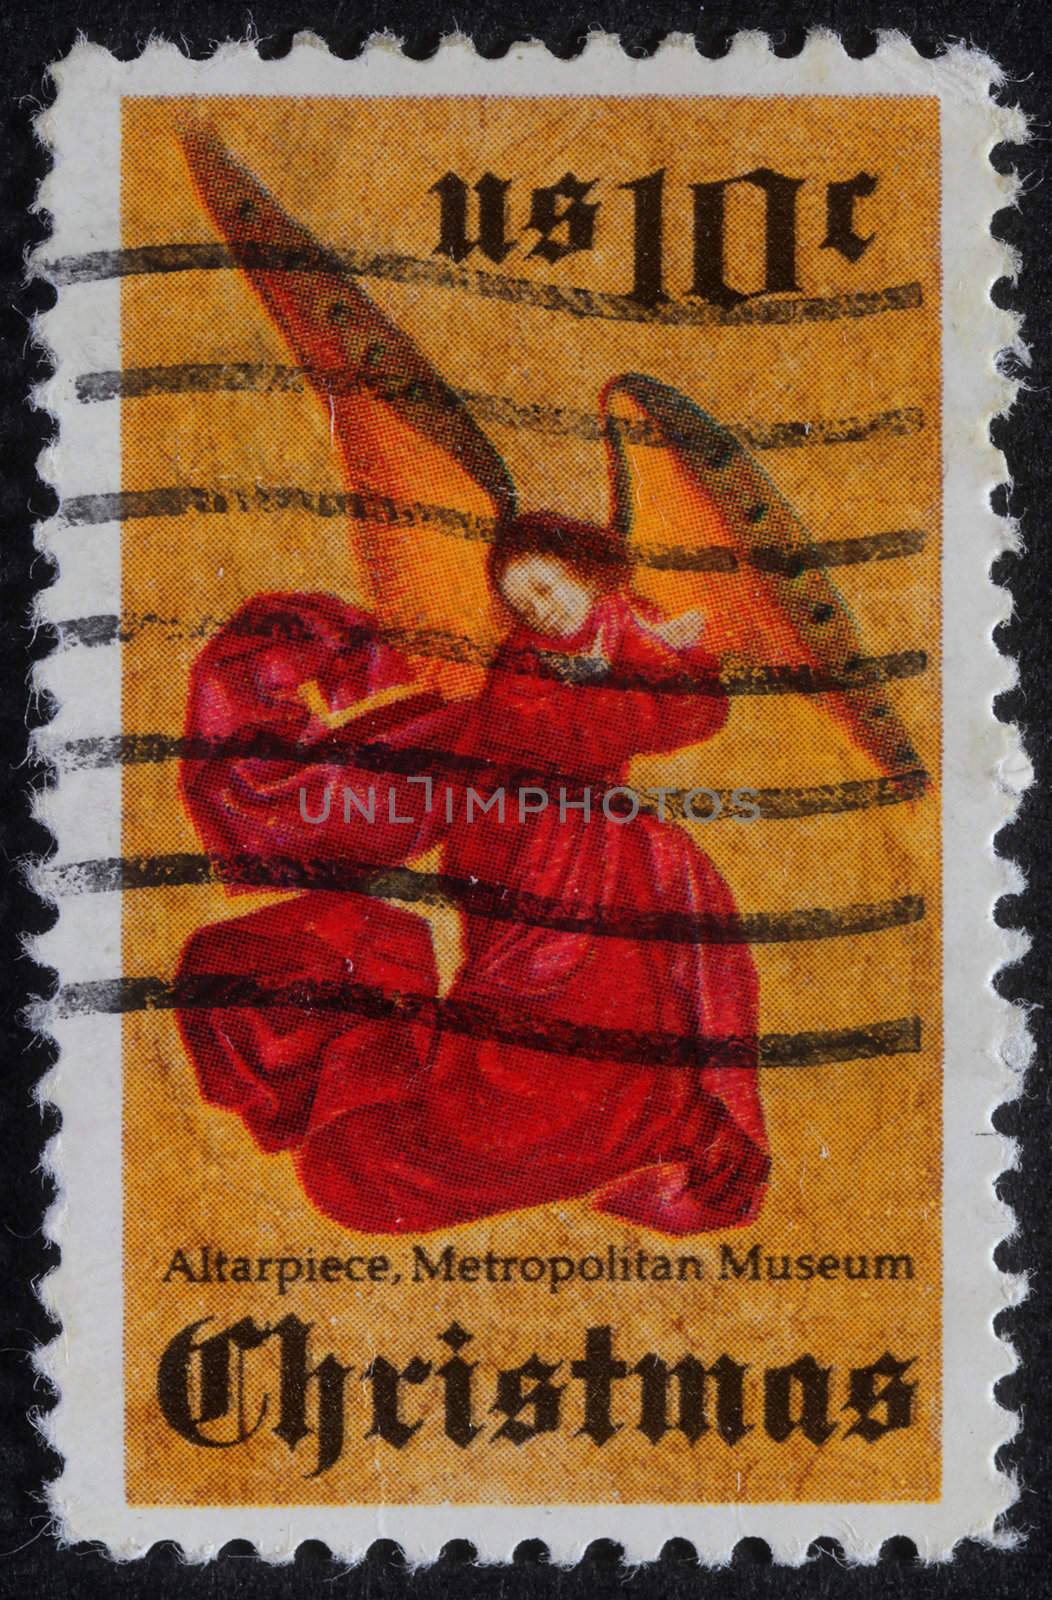 UNITED STATES OF AMERICA - CIRCA 1980: A greeting Christmas stamp printed in USA showing angel